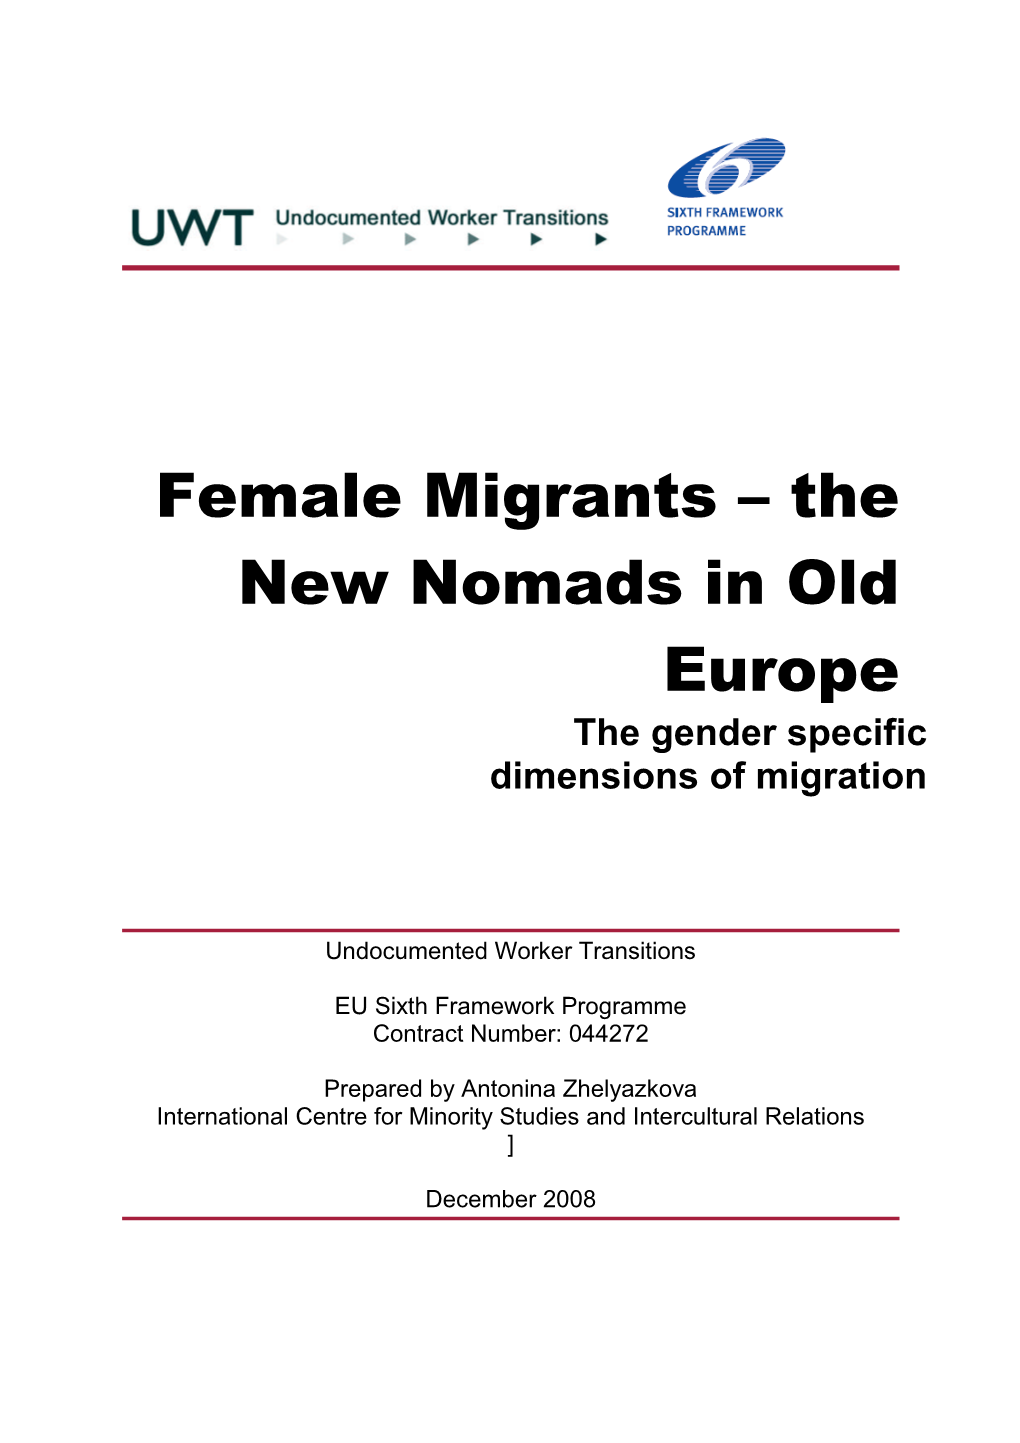 Female Migrants – the New Nomads in Old Europe the Gender Specific Dimensions of Migration